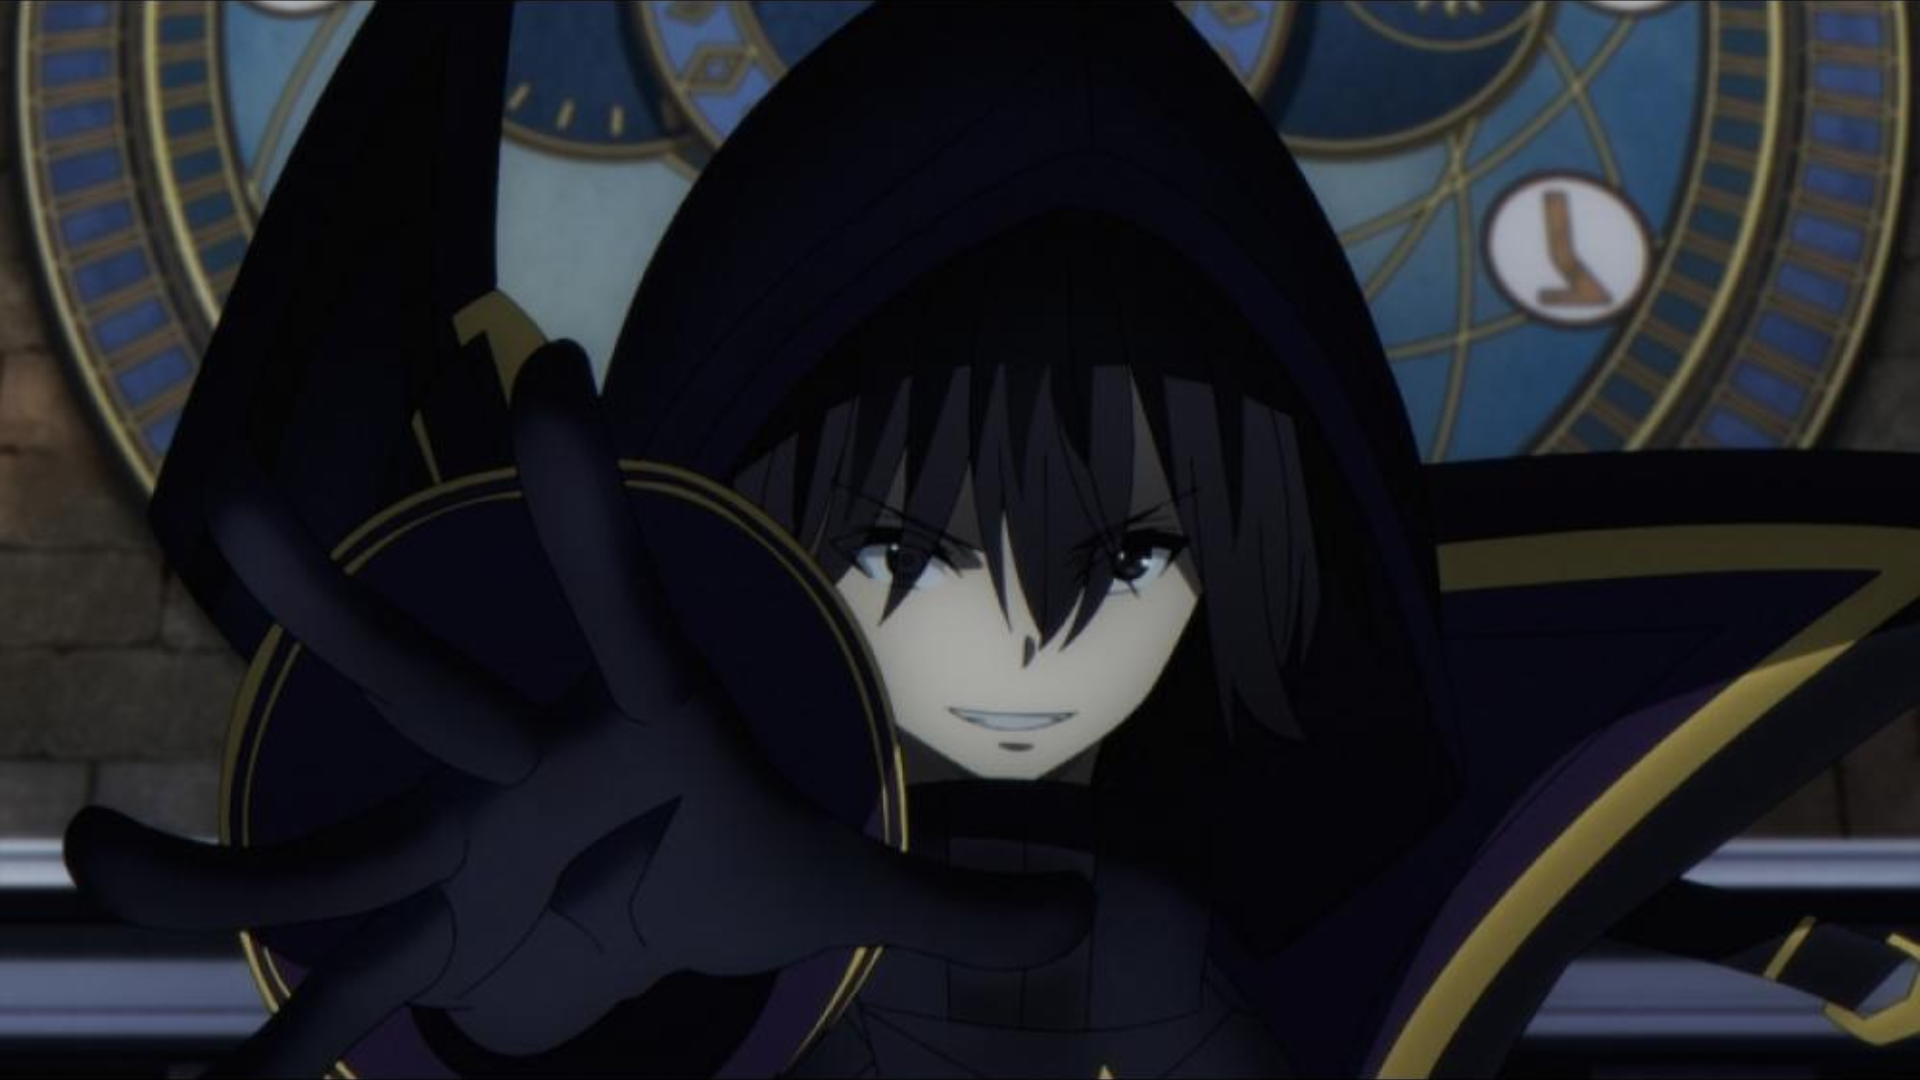 Is The Eminence in Shadow on Netflix, Crunchyroll, Hulu, or Funimation?  Where to Watch Online?